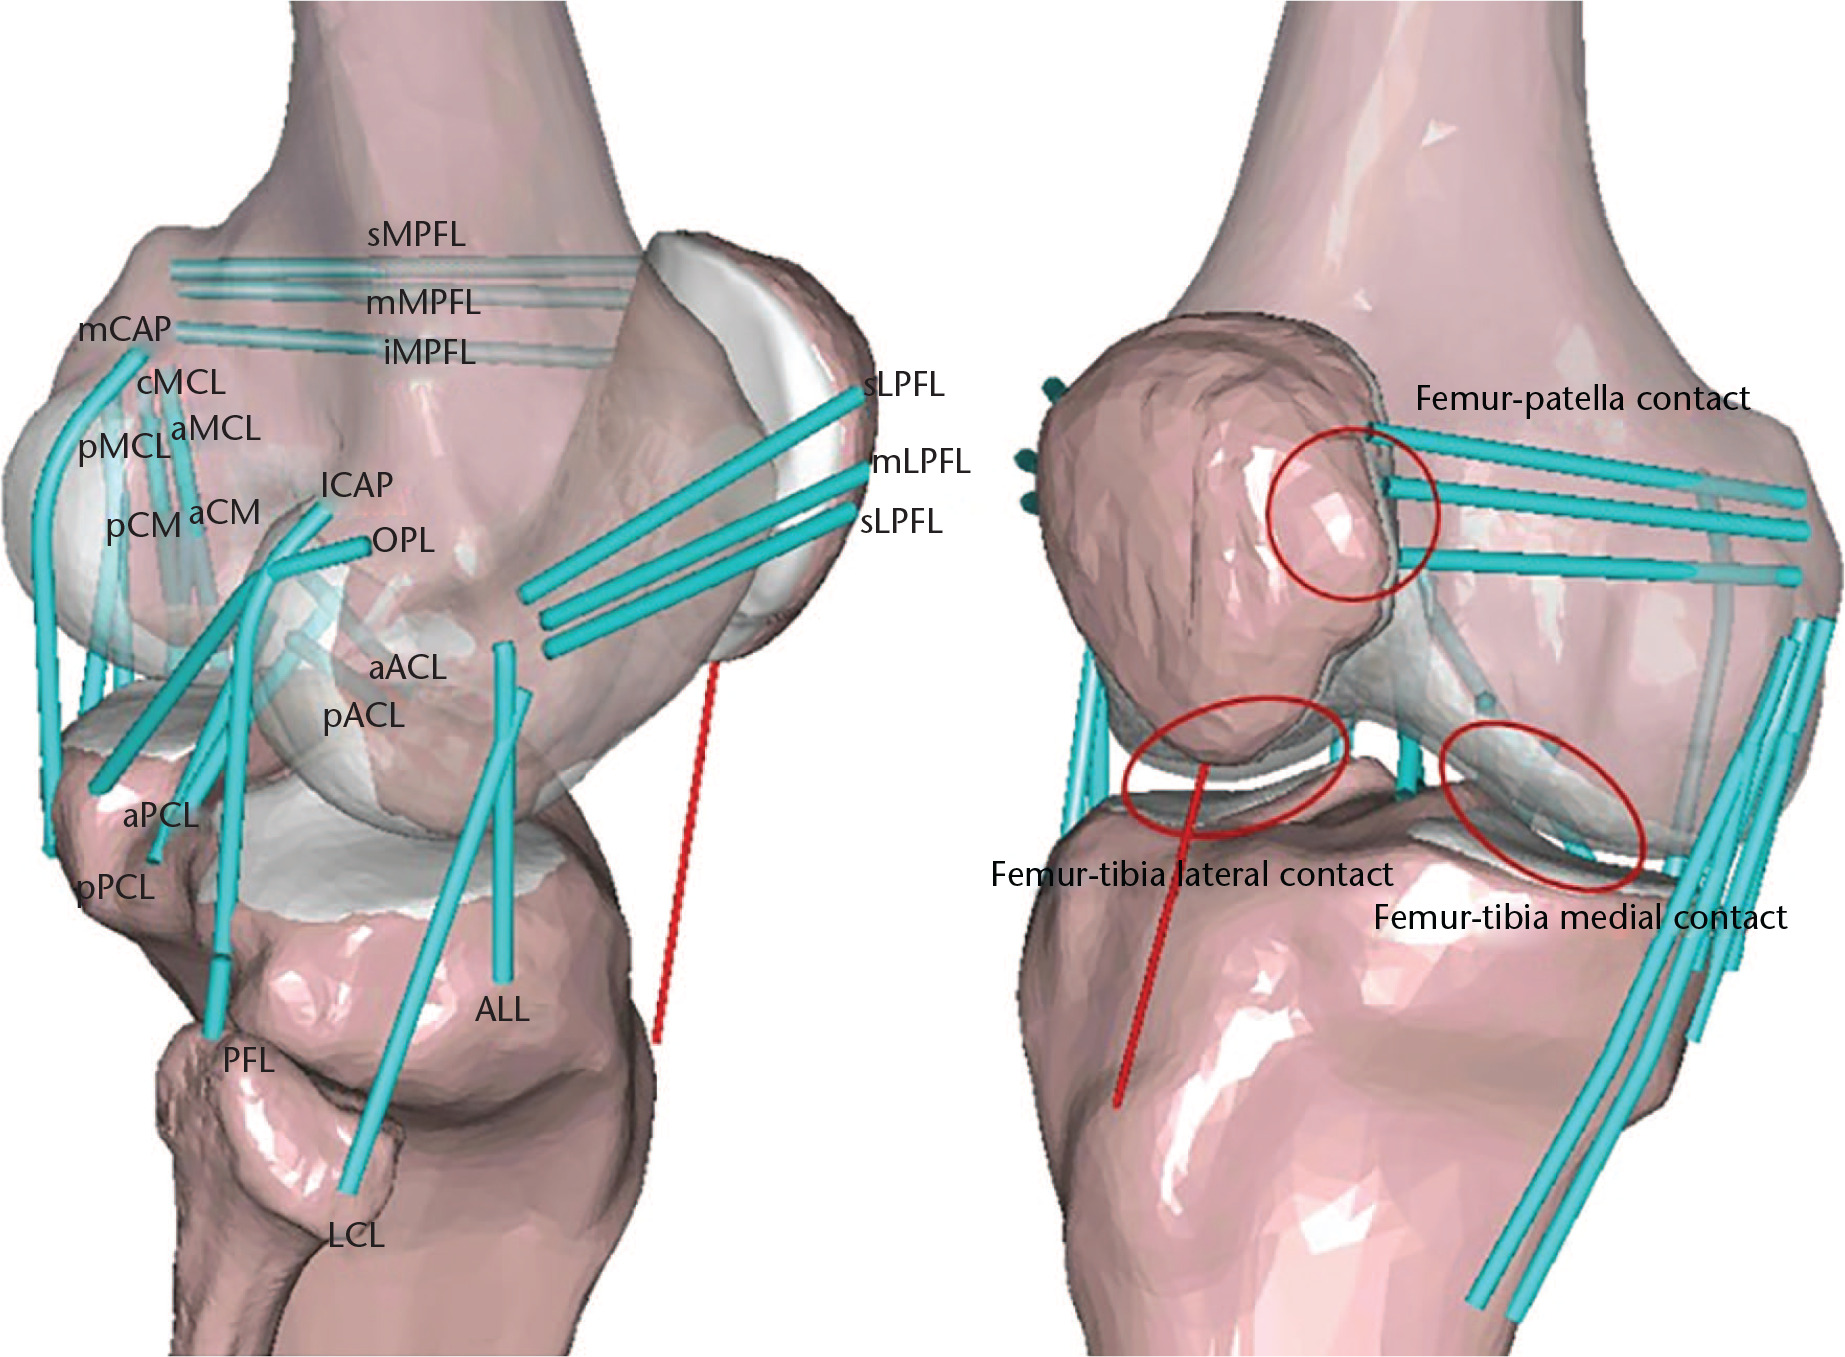 Fig. 2 
            Schematic of subject-specific musculoskeletal model during gait and squat conditions with contact conditions and 21 ligament bundles: anteromedial bundle (aACL) and posterolateral bundle (pACL) of the anterior cruciate ligament; anterolateral bundle (aPCL) and posteromedial bundle of the posterior cruciate ligament (pPCL); anterolateral ligament (ALL); lateral collateral ligament (LCL); popliteofibular ligament (PFL); anterior portion (aMCL), central portion (cMCL), and posterior portion (pMCL) of the medial collateral ligament; anterior portion (aCM) and posterior portion (pCM) of the deep medial collateral ligament; medial (mCAP) and lateral (lCAP) posterior capsules; oblique popliteal ligament (OPL); superior (sMPFL), middle (mMPFL), and inferior (iMPFL) medial patellofemoral ligament; and superior (sLPFL), middle (mLPFL), and inferior (iLPFL) lateral patellofemoral ligament.
          